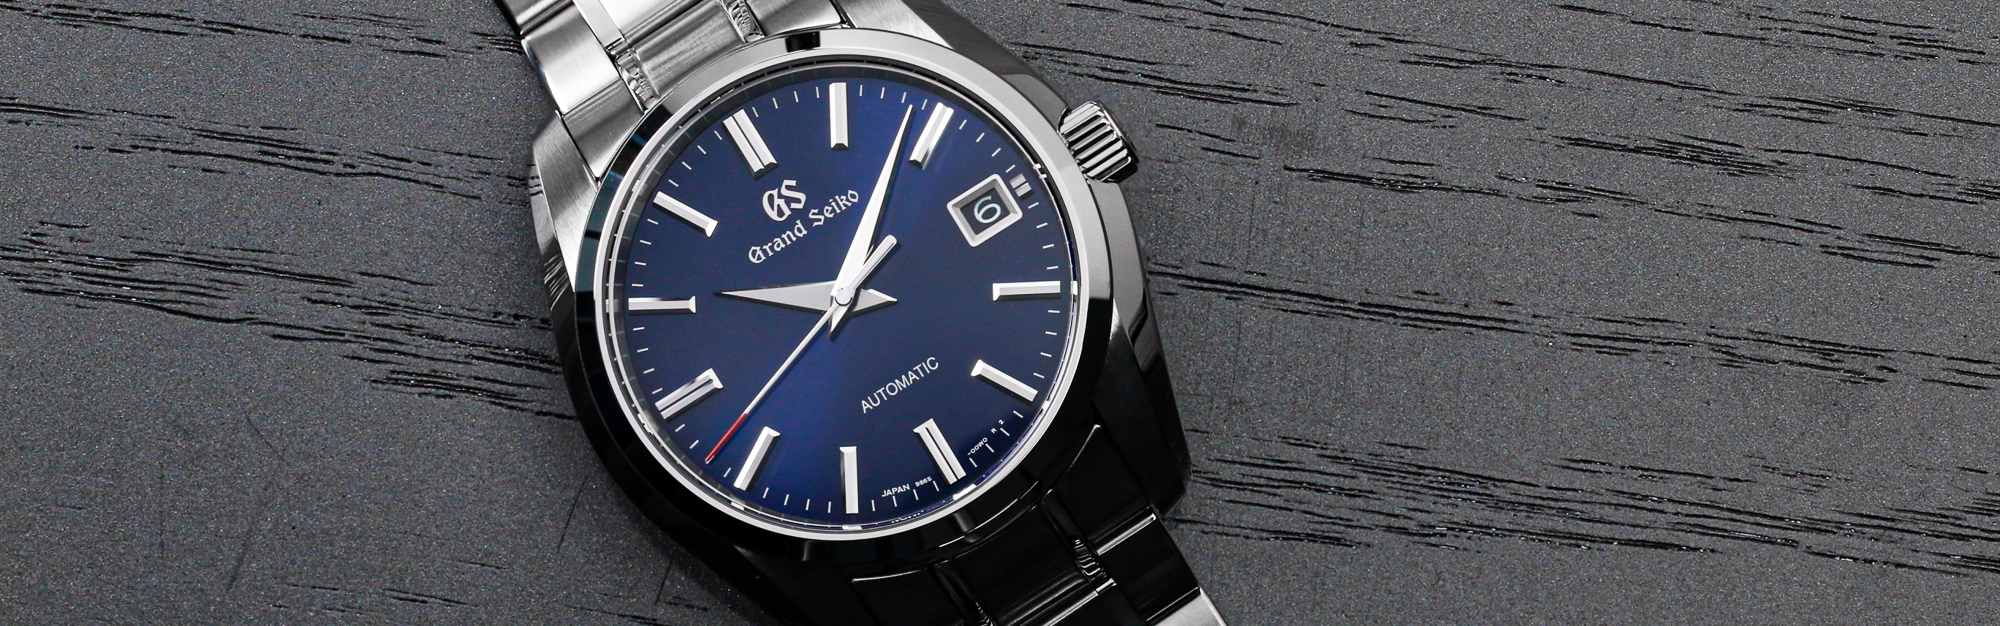 Grand Seiko SBGR321 wristwatch with a blue dial and red accents on a tabletop.